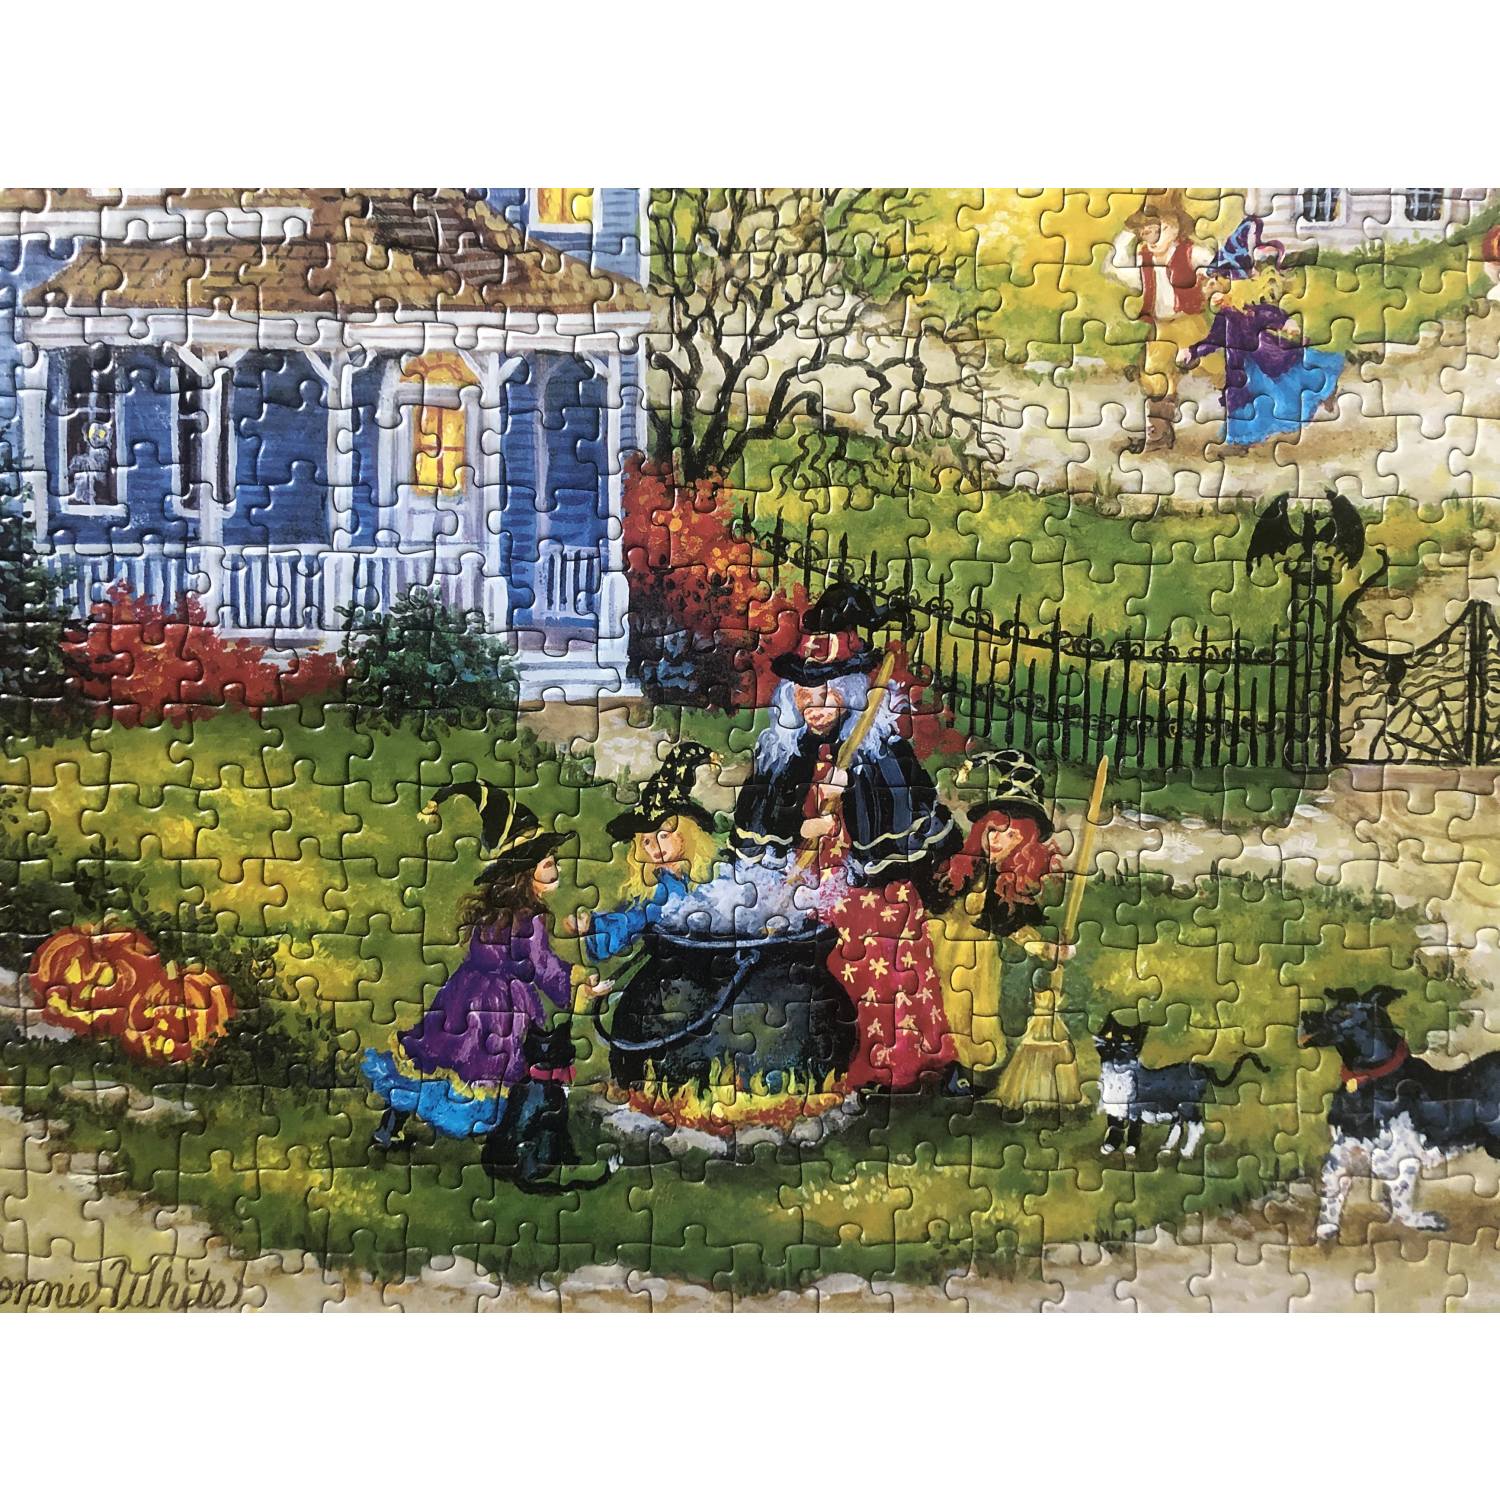 Glow in the Dark - Three Little Witches 1000 Piece Jigsaw Puzzle